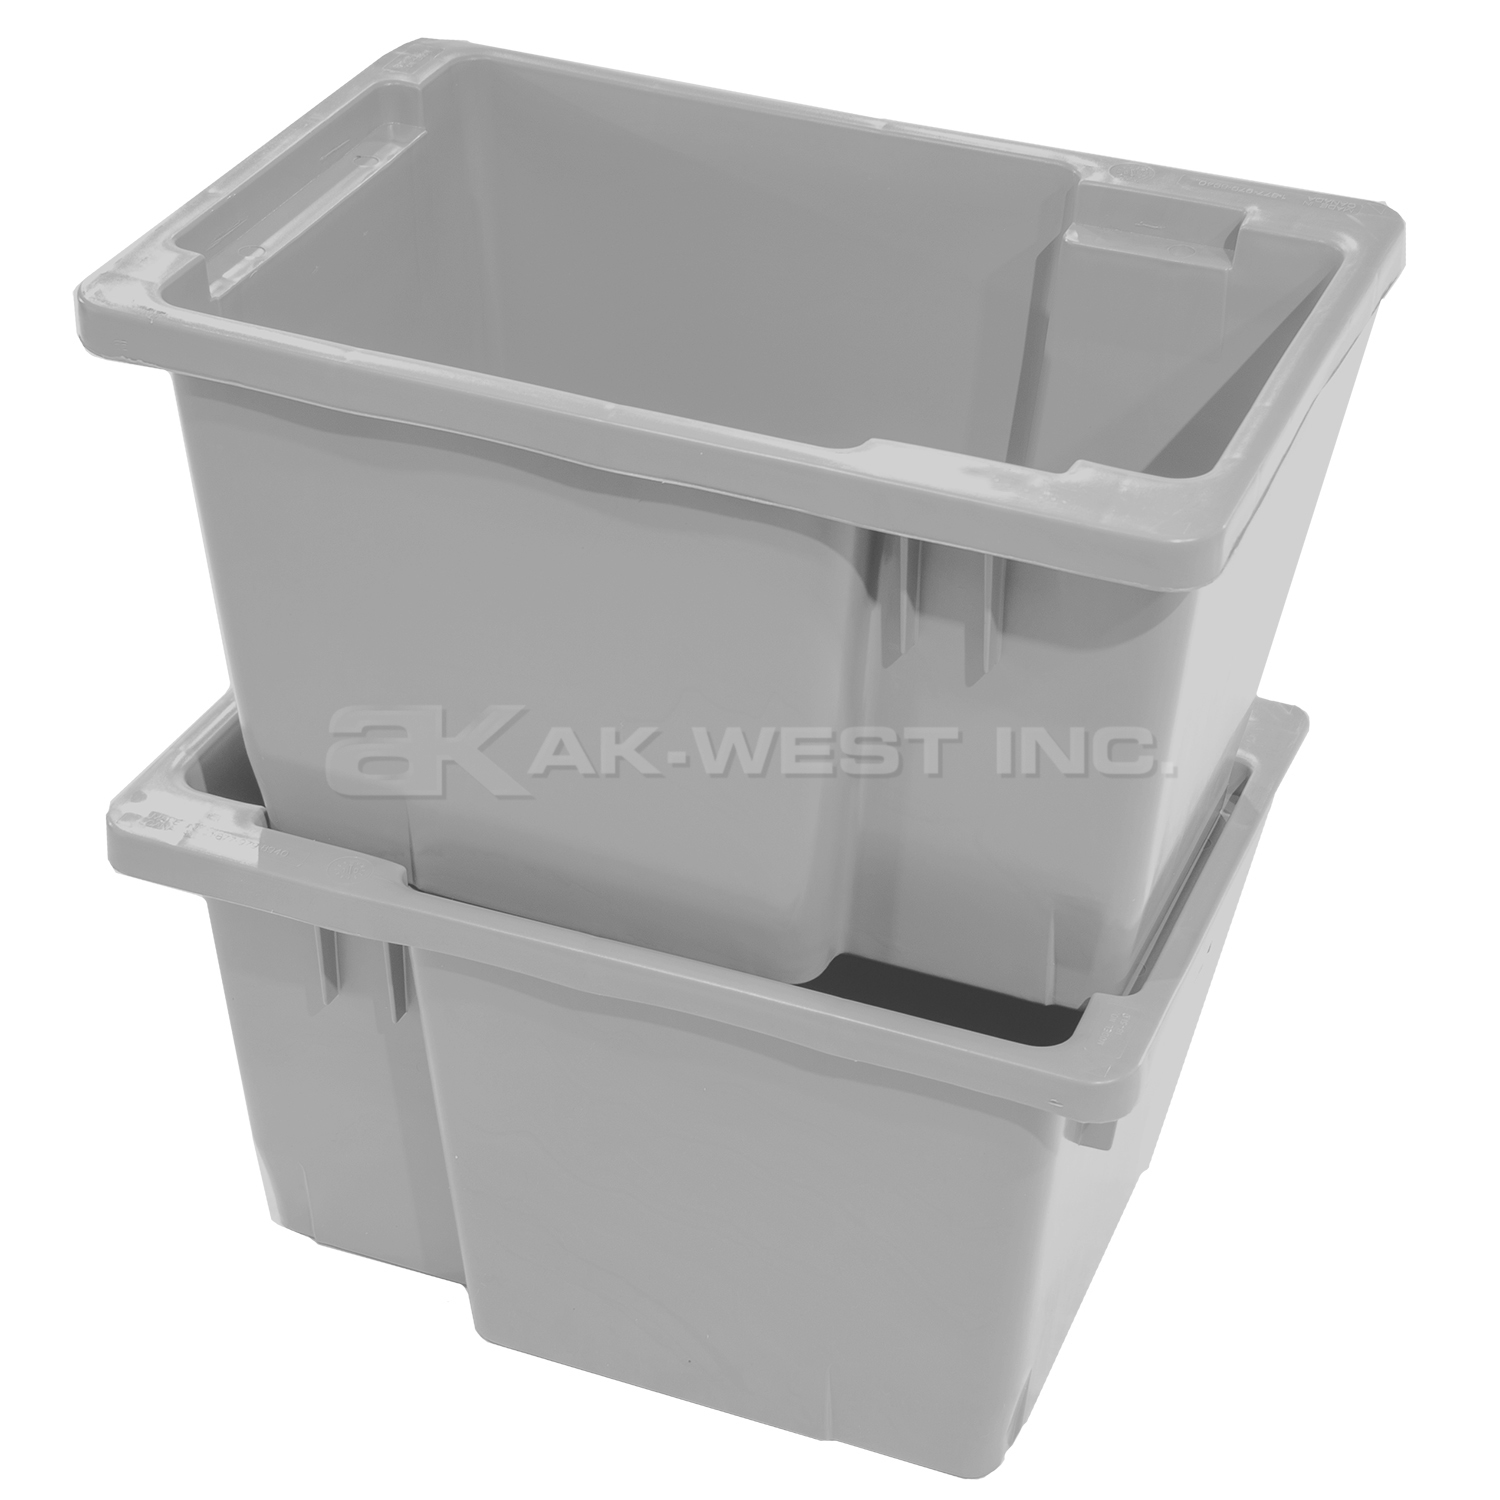 Grey, 21" x 14" x 12", Solid Stack and Nest Container (Alt. M/N: 18-510)